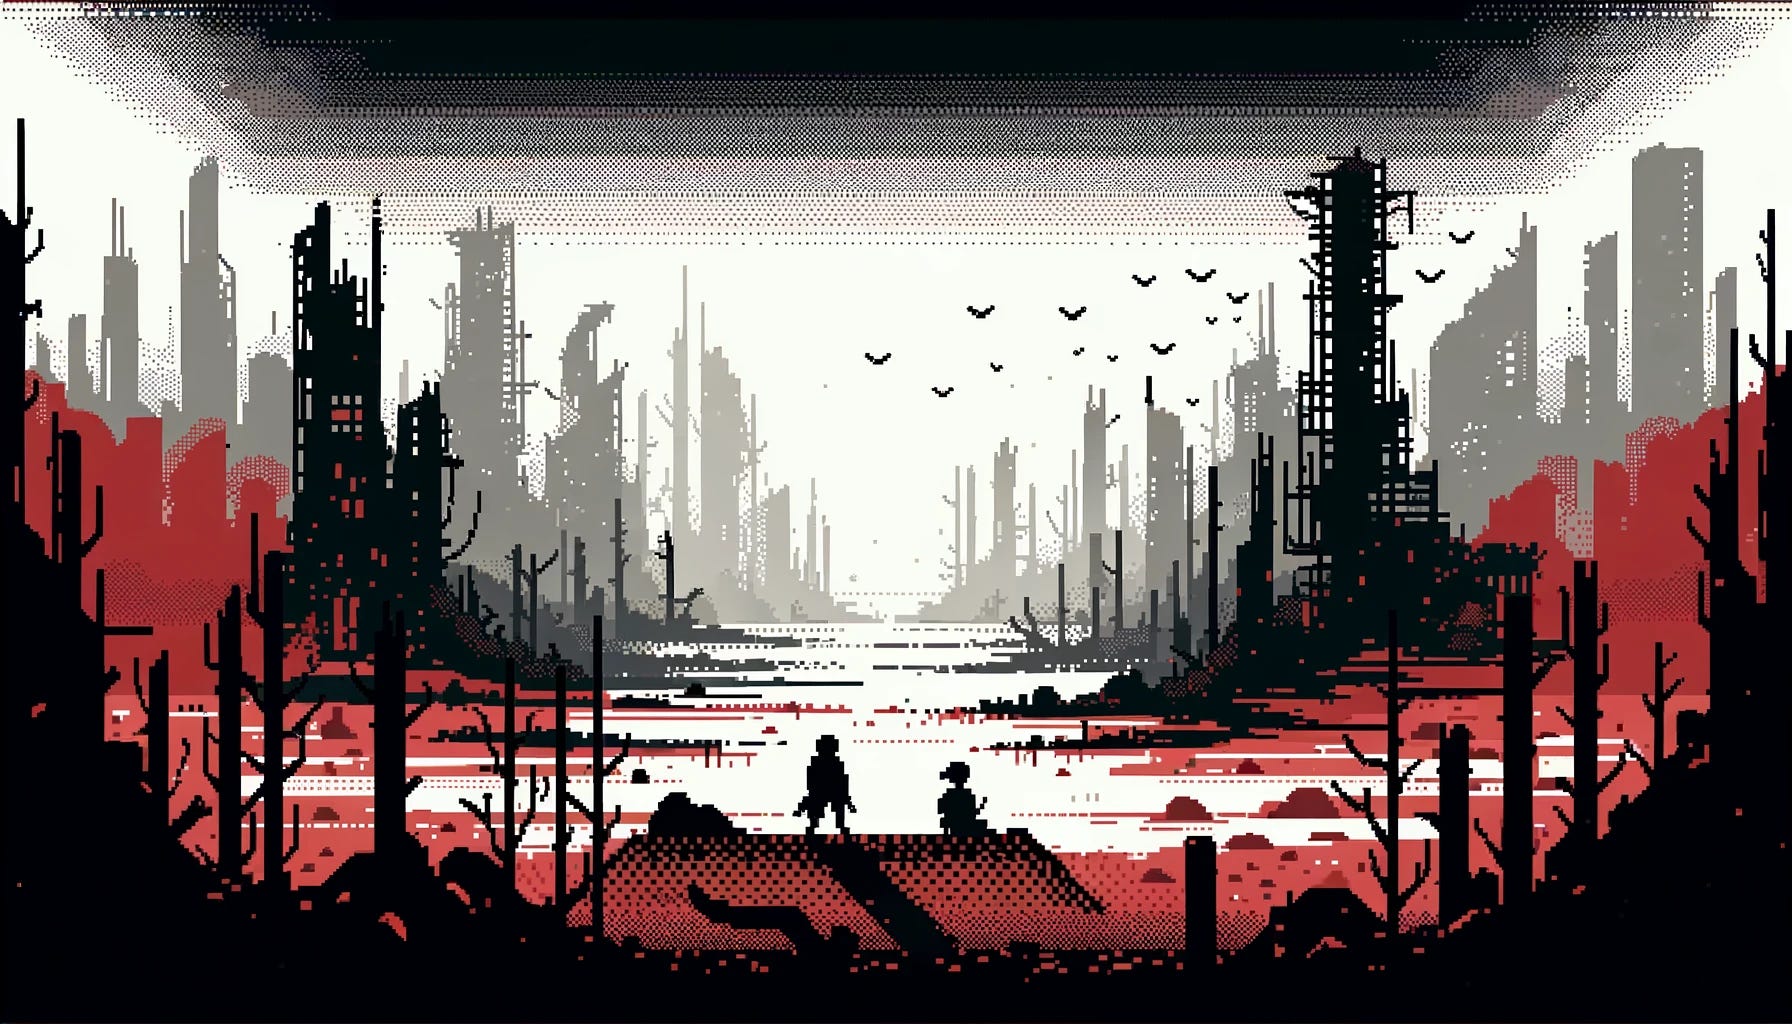 Create a 16-bit style video game cutscene with a simpler, more abstract design, focusing on an apocalyptic theme. The image should convey a sense of desolation and doom through basic shapes and minimal details, using a limited color palette of reds, blacks, and grays. The scene should suggest ruined landscapes and a bleak atmosphere without intricate details, embodying feelings of abandonment and despair. Characters, if included, are mere silhouettes, representing alienation and affliction. This approach aims to capture the mood with less complexity, evoking the essence of an apocalyptic world through a more abstract and minimalistic style.